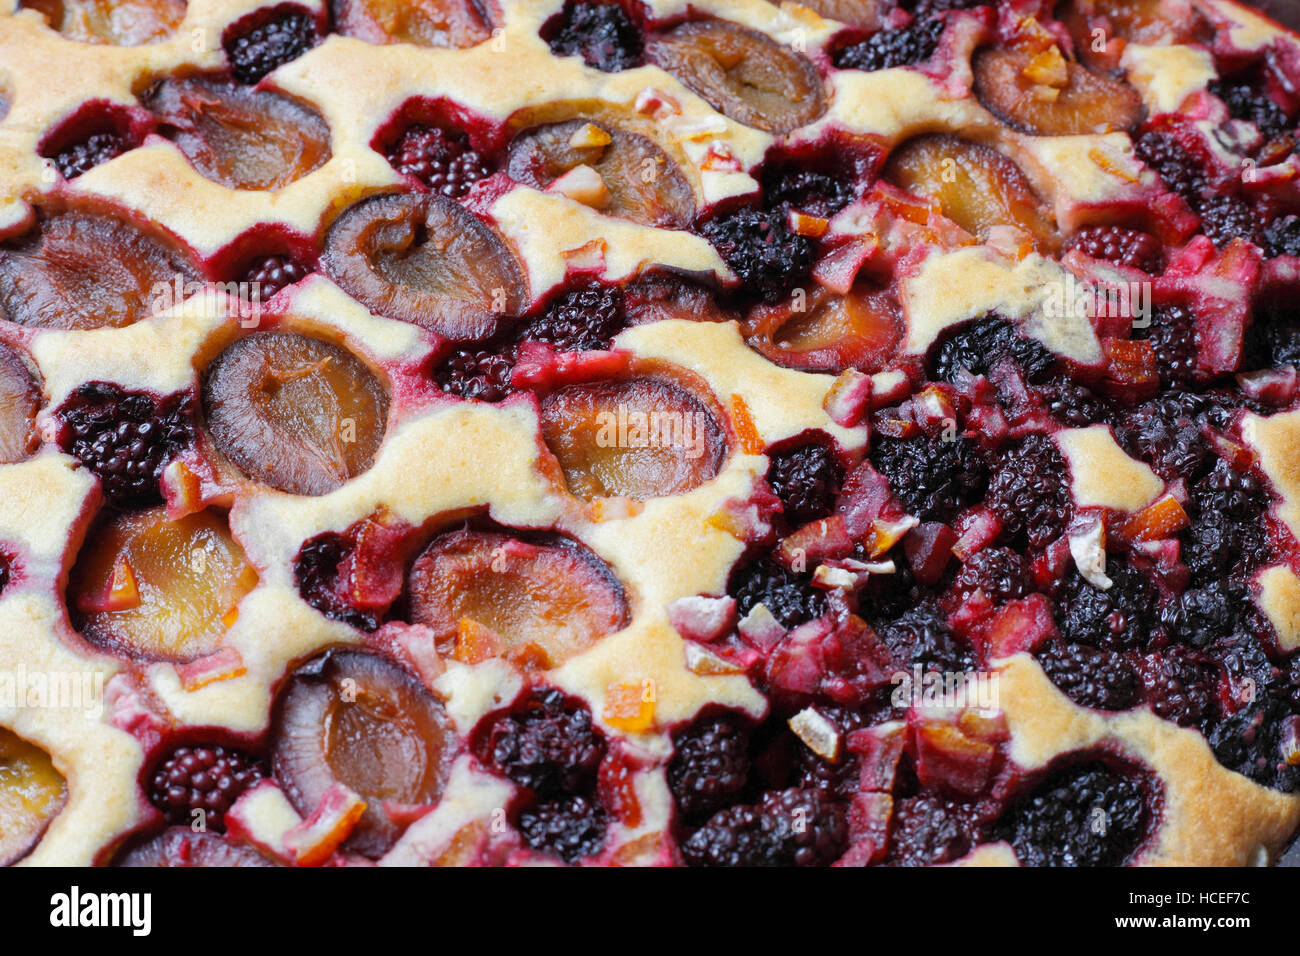 Fruit cake with plums and blackberries Stock Photo